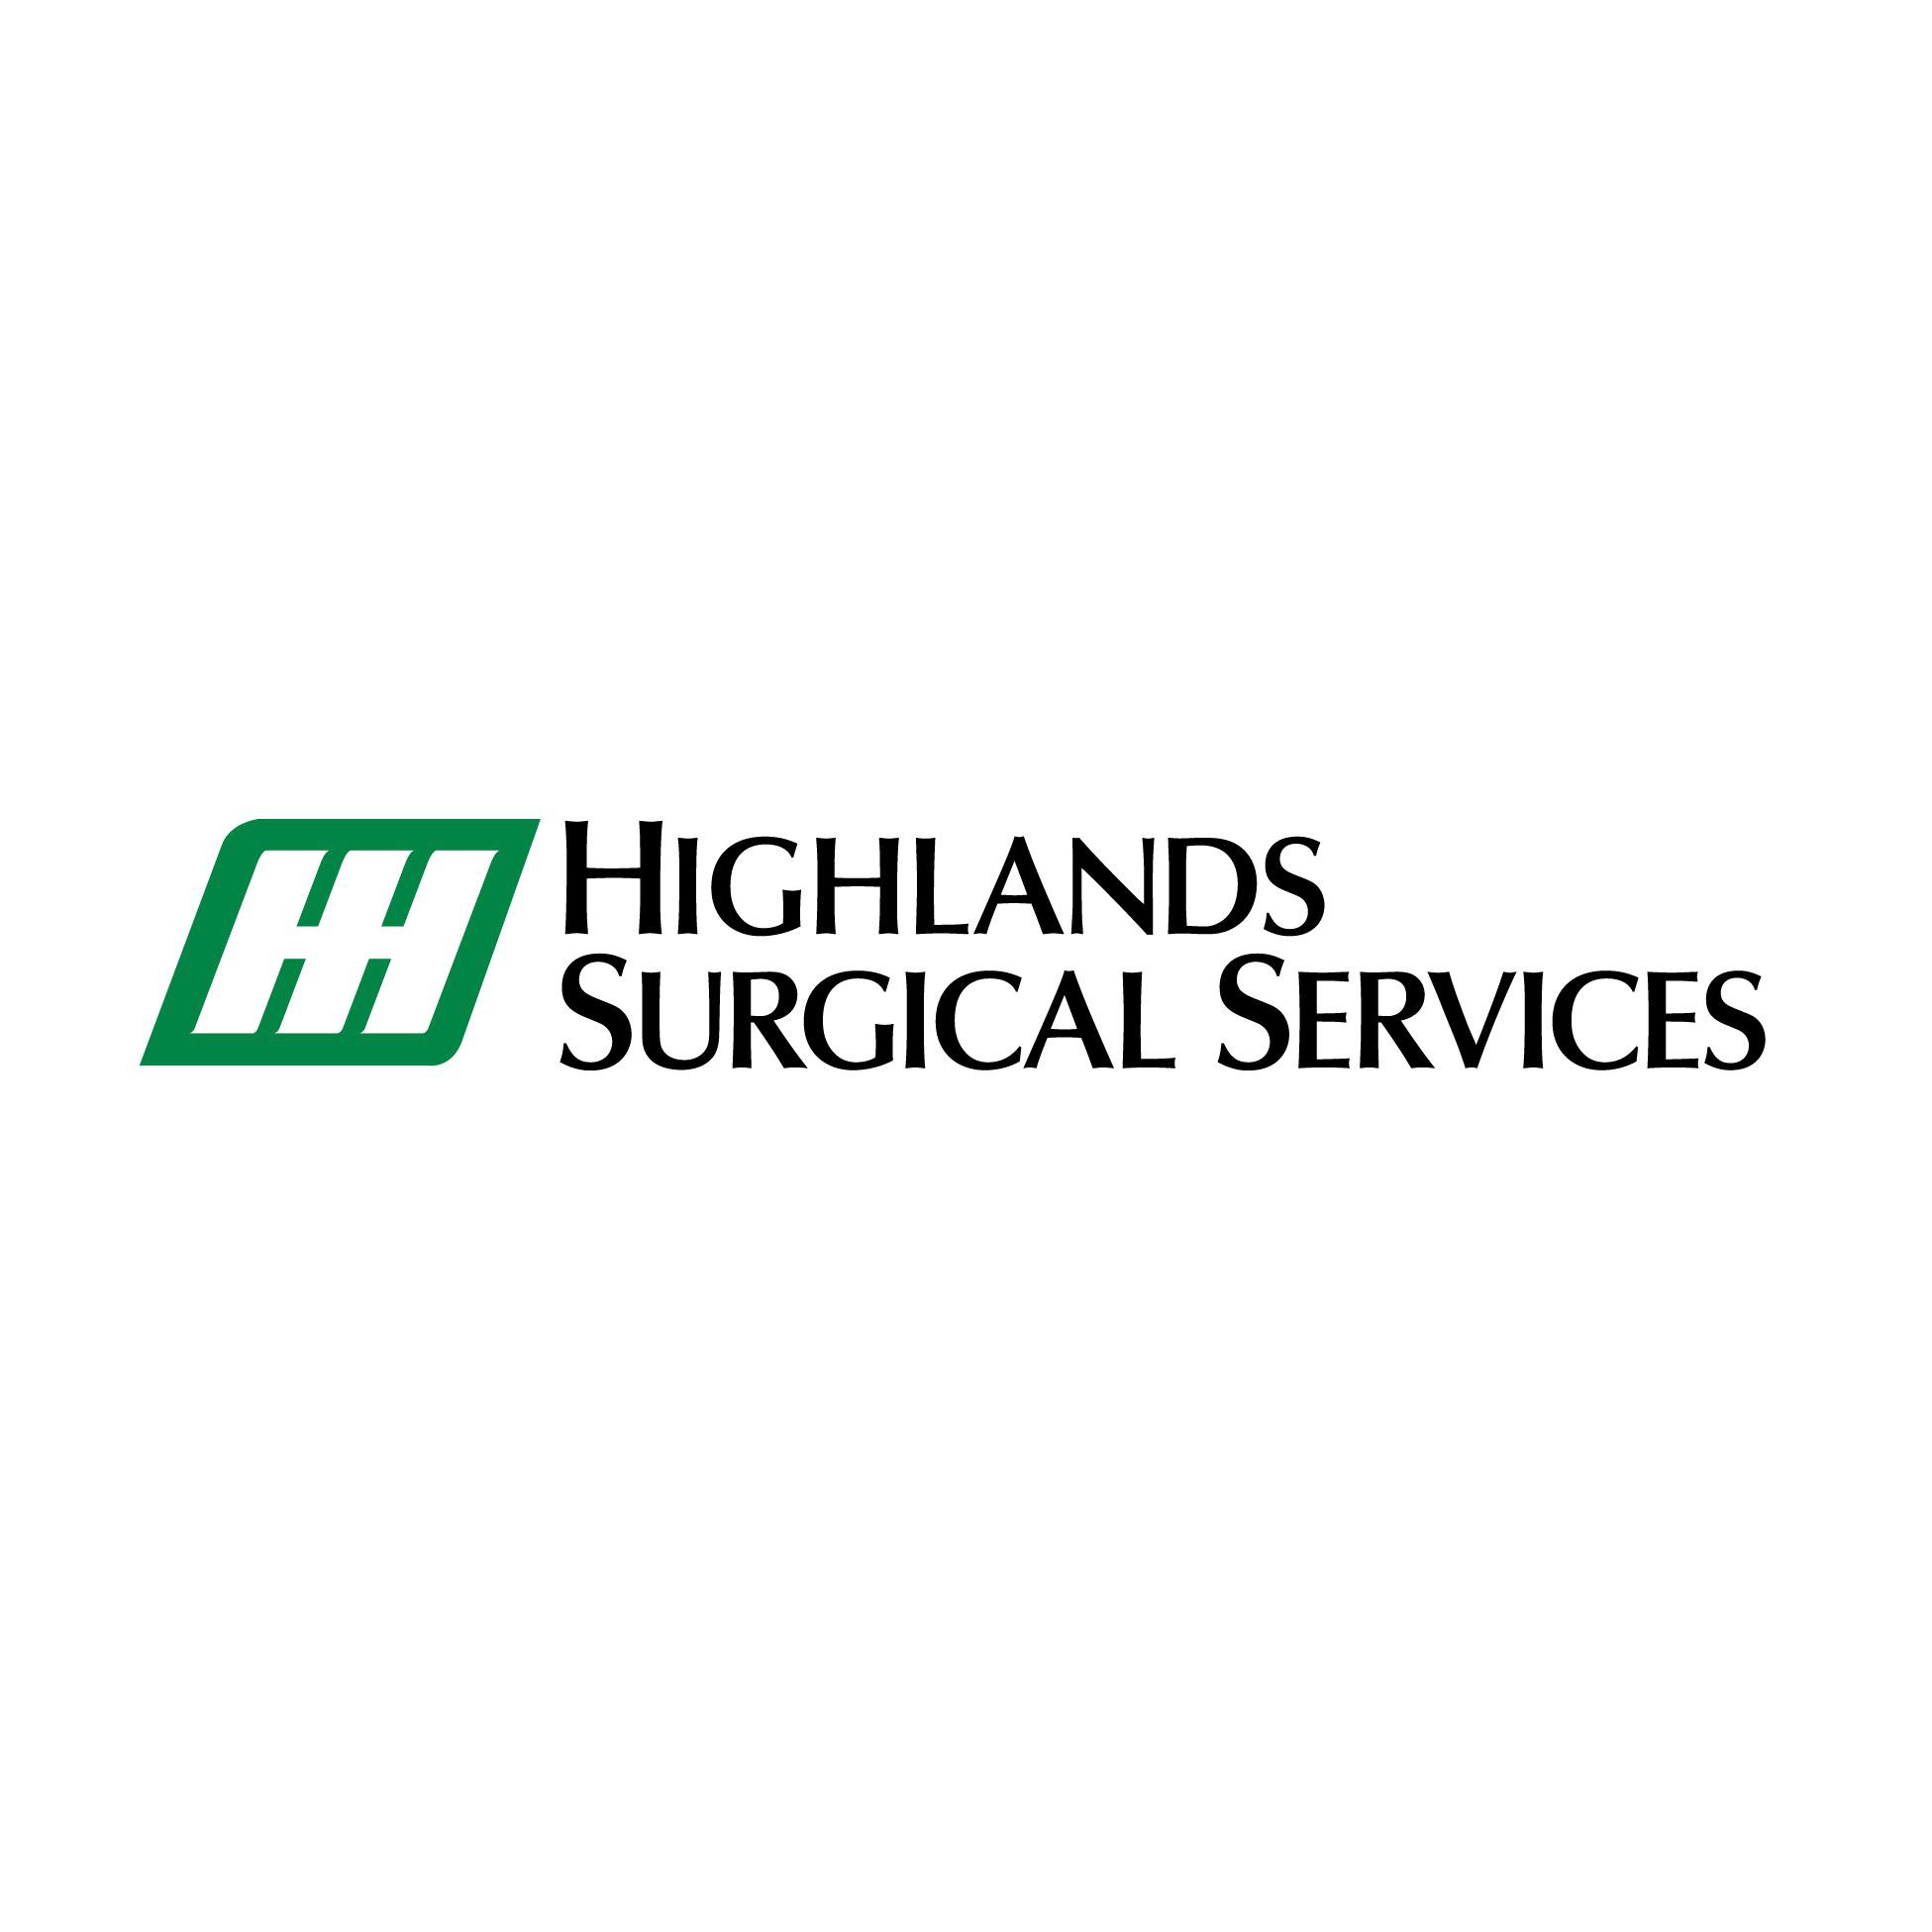 Highlands Surgical Services